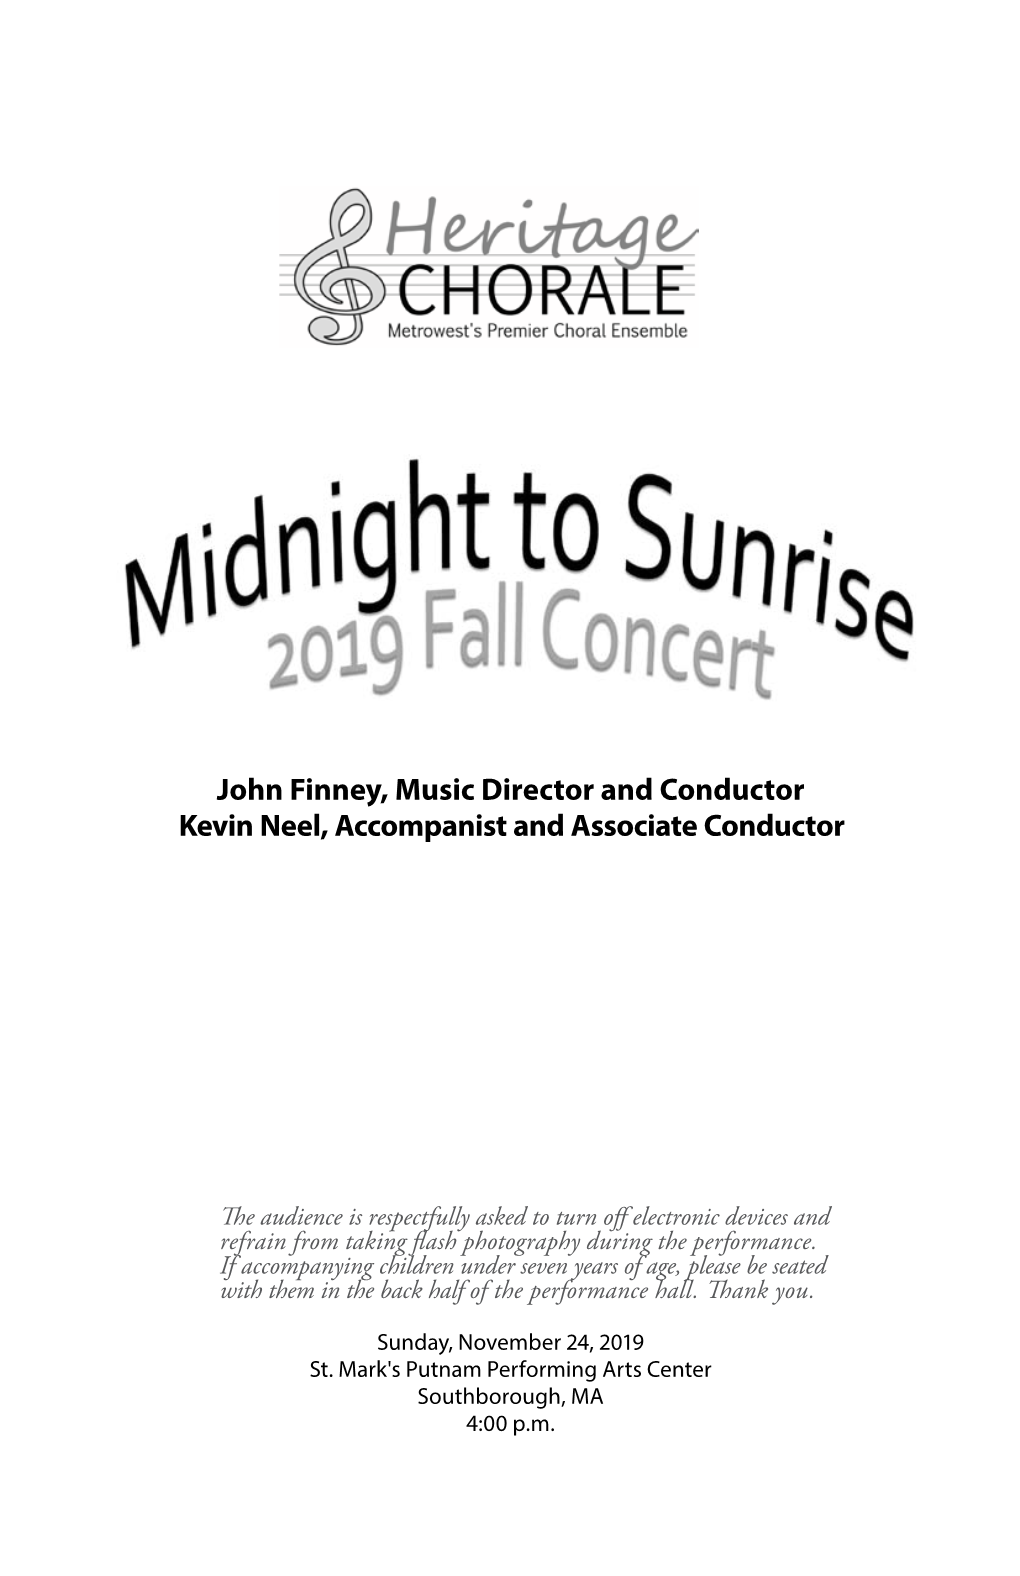 John Finney, Music Director and Conductor Kevin Neel, Accompanist and Associate Conductor